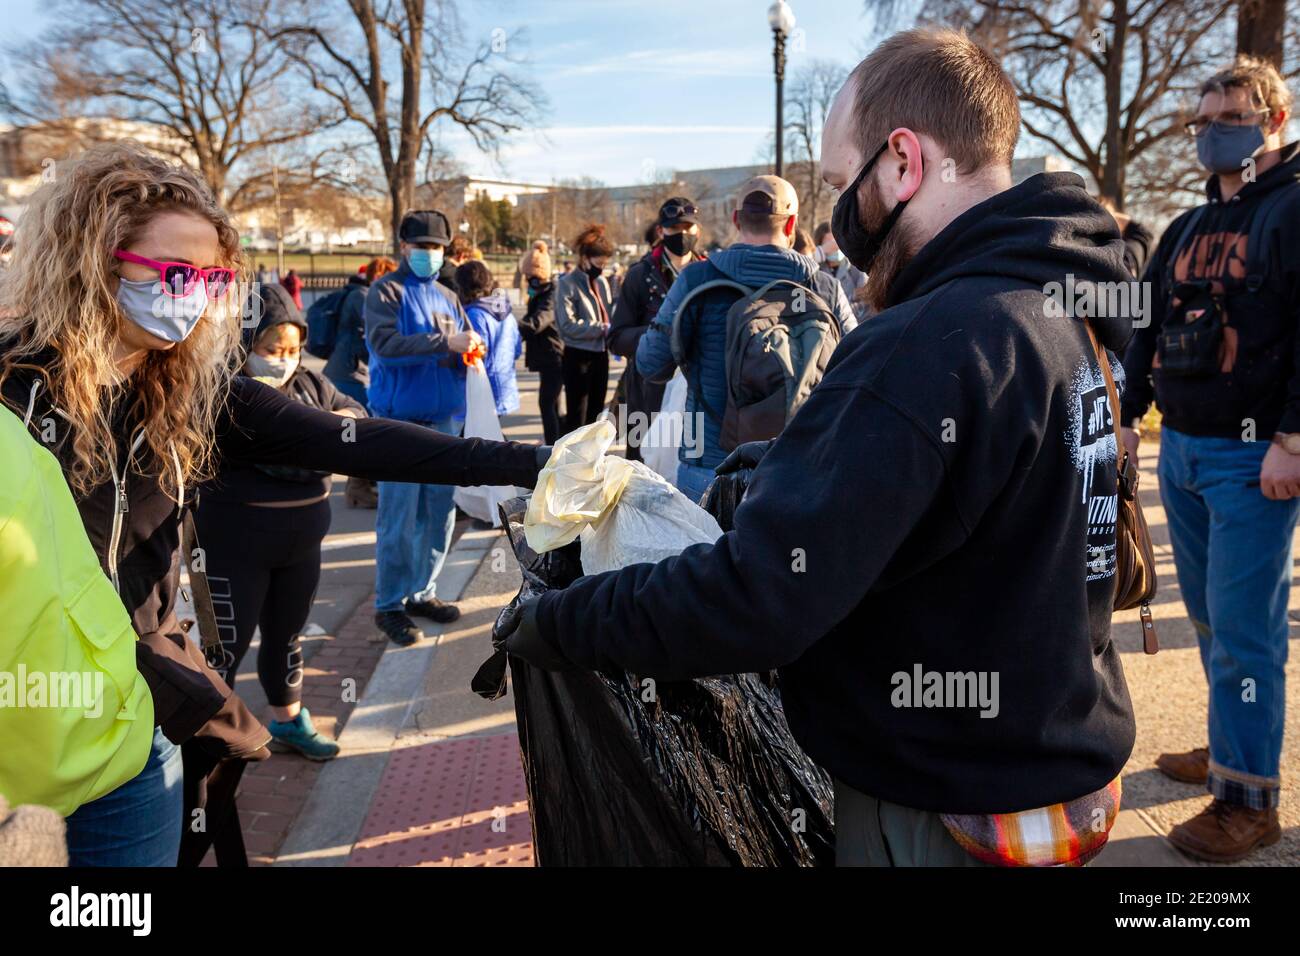 Washington, DC, USA, 10 January 2021.  Pictured: A volunteer hands in her trash bag during Operation Clean Sweep.  The event was an effort to clean up trash and propaganda left behind by fascists and Trump supporters following the January 6 Capitol insurrection.  It was hosted by Continue to Serve, an anti-racist organization of military veterans.  Credit: Allison C Bailey/Alamy Live News Stock Photo